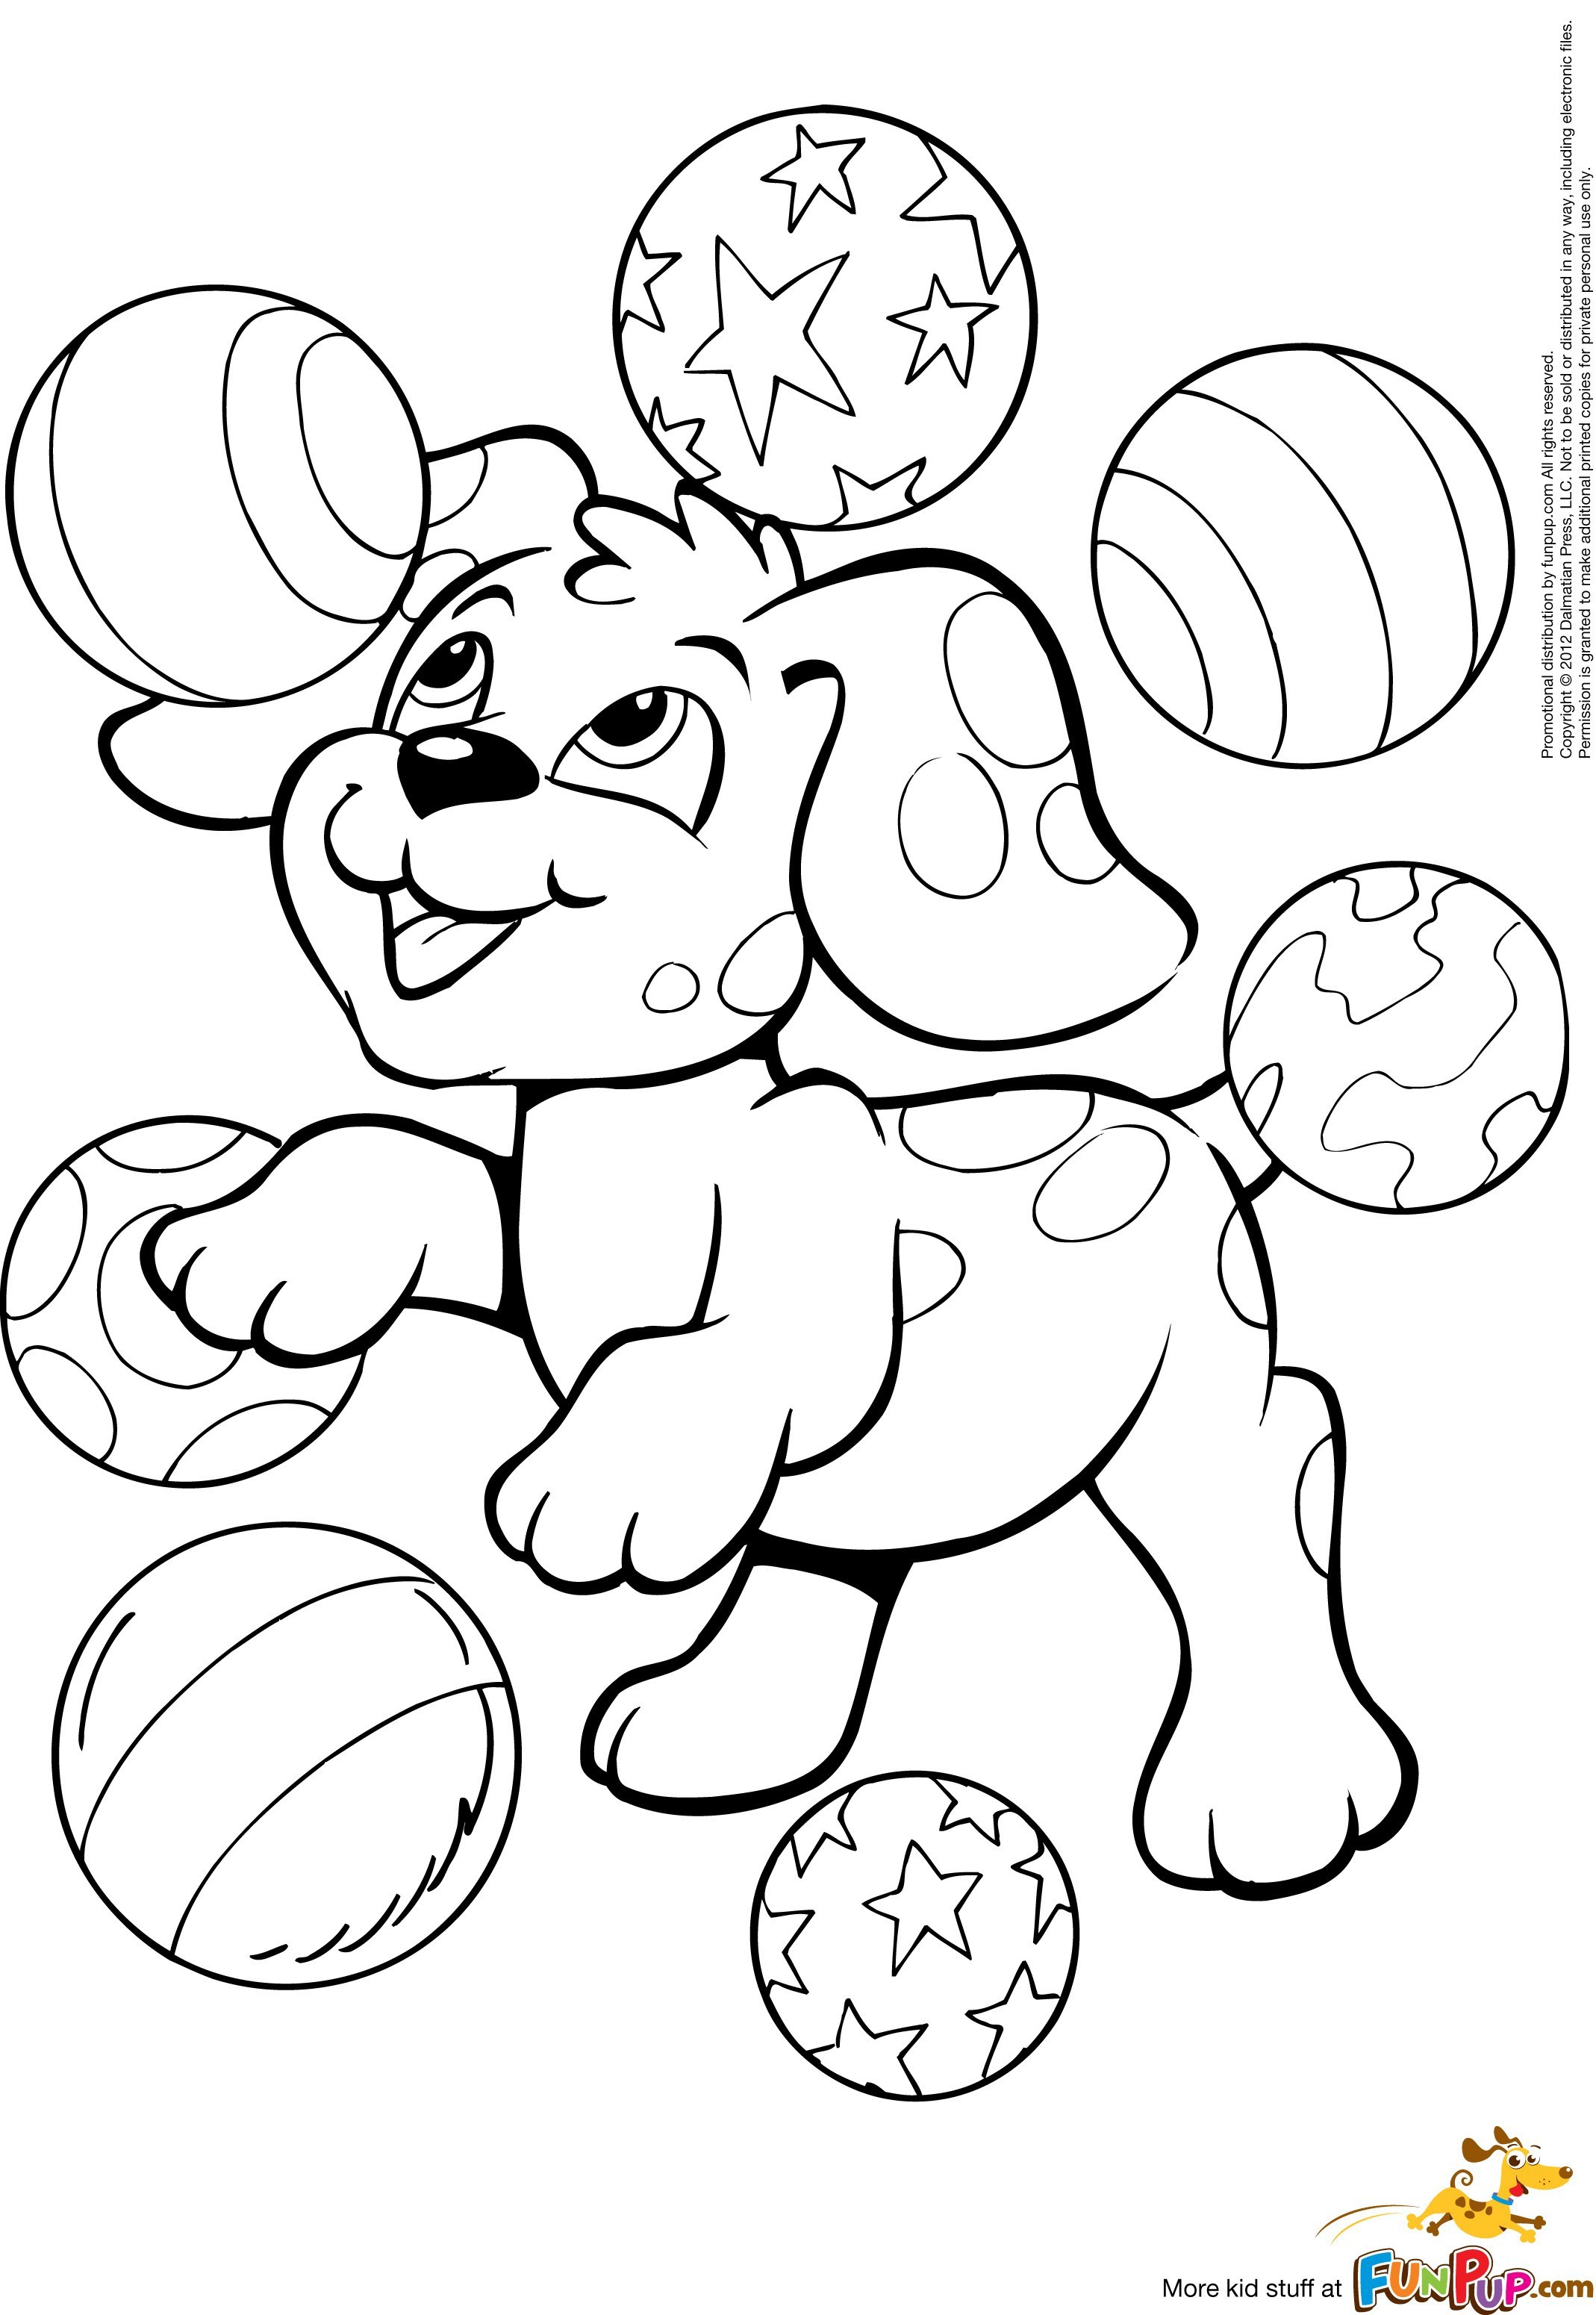 Puppy Coloring Pages Printable Free Wallpaper